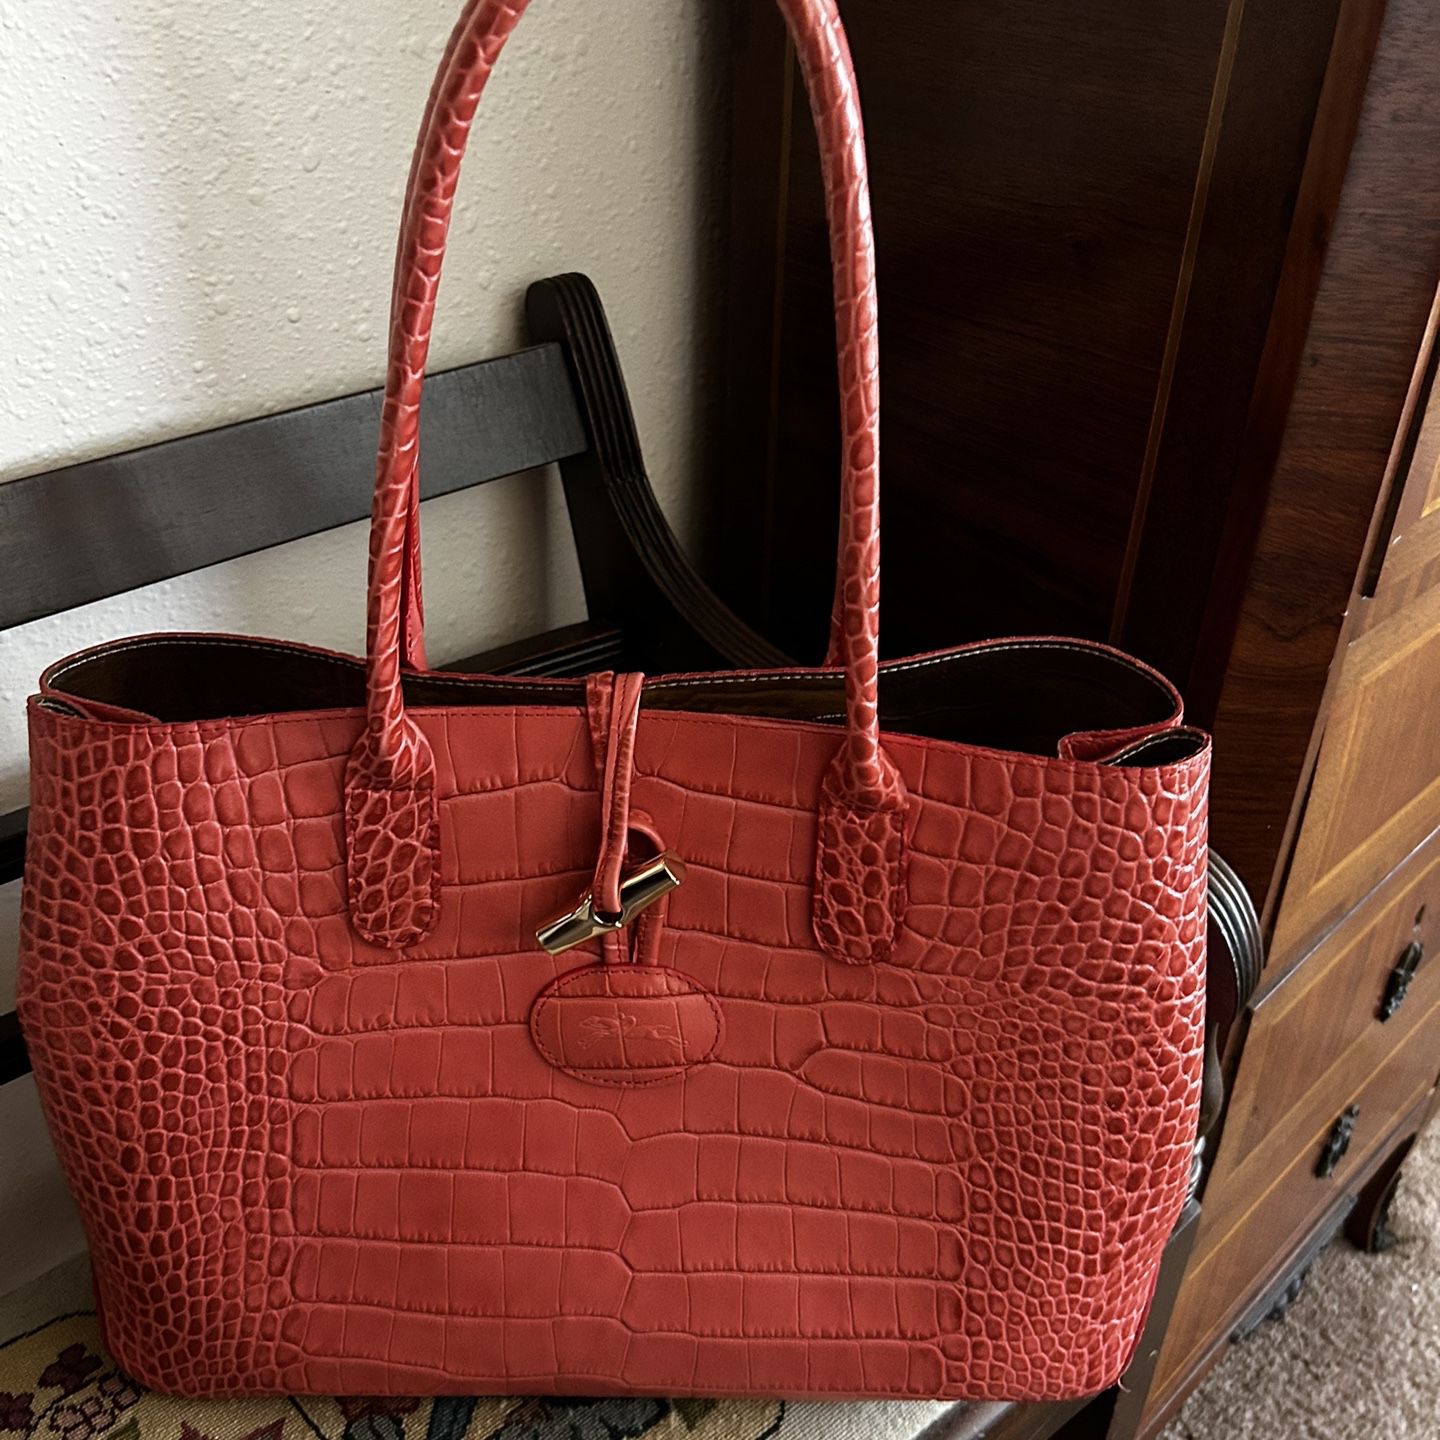 Longchamp Embossed Leather Tote Bag